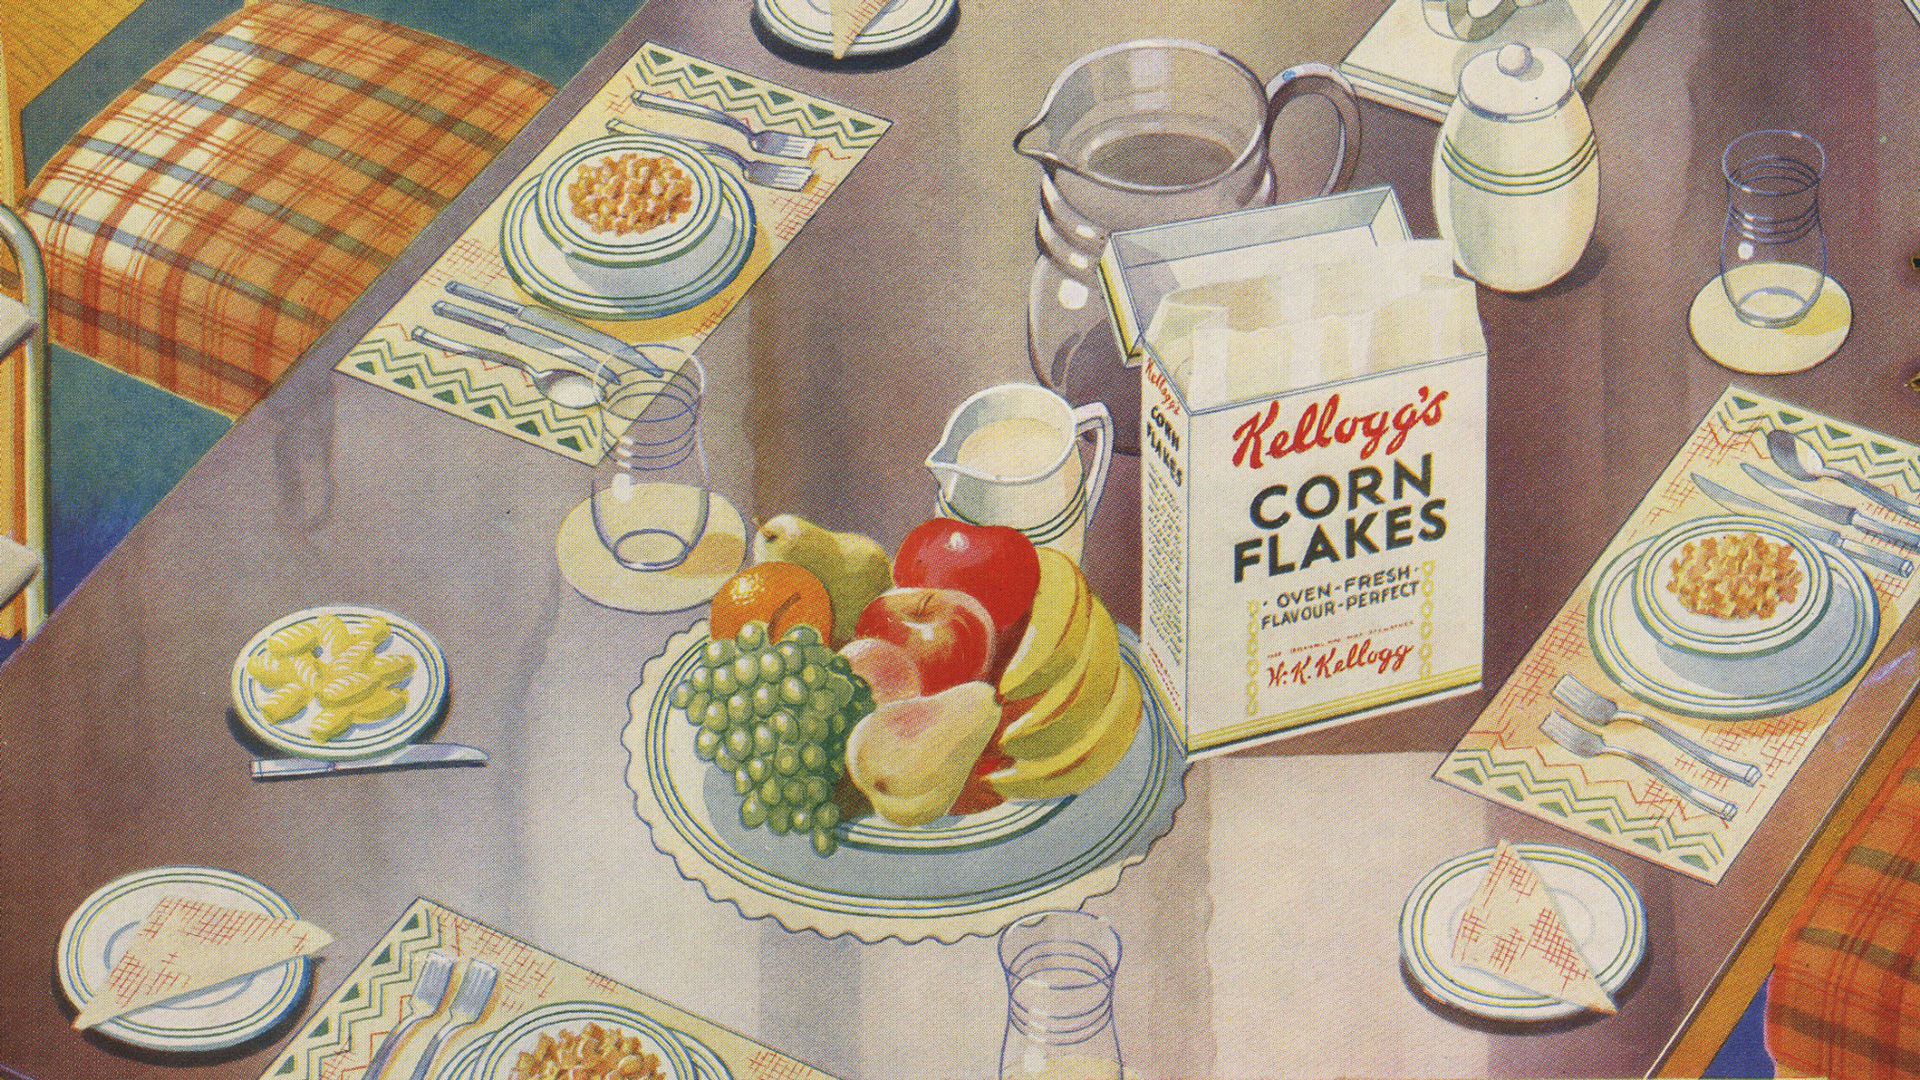 A depiction of a typical breakfast meal on a table